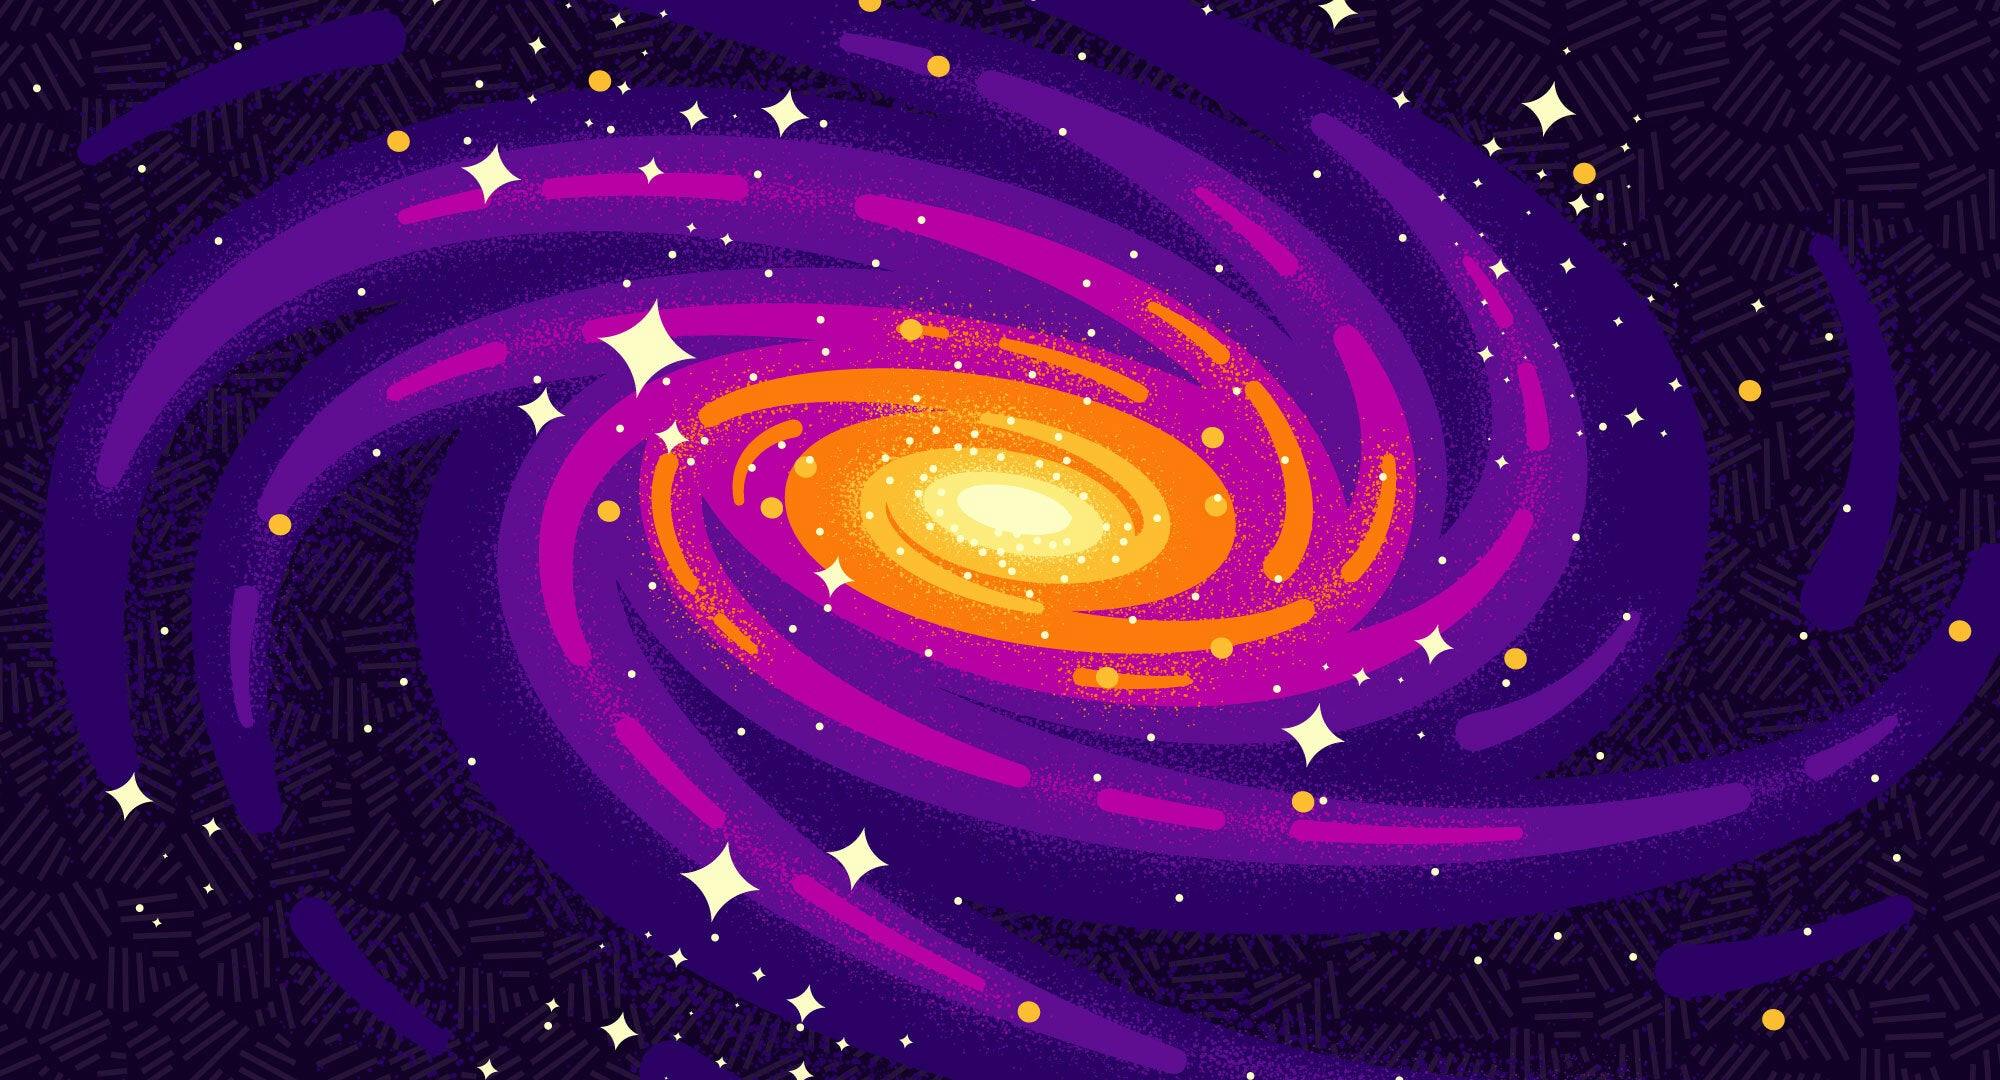 Illustrated banner of a galaxy